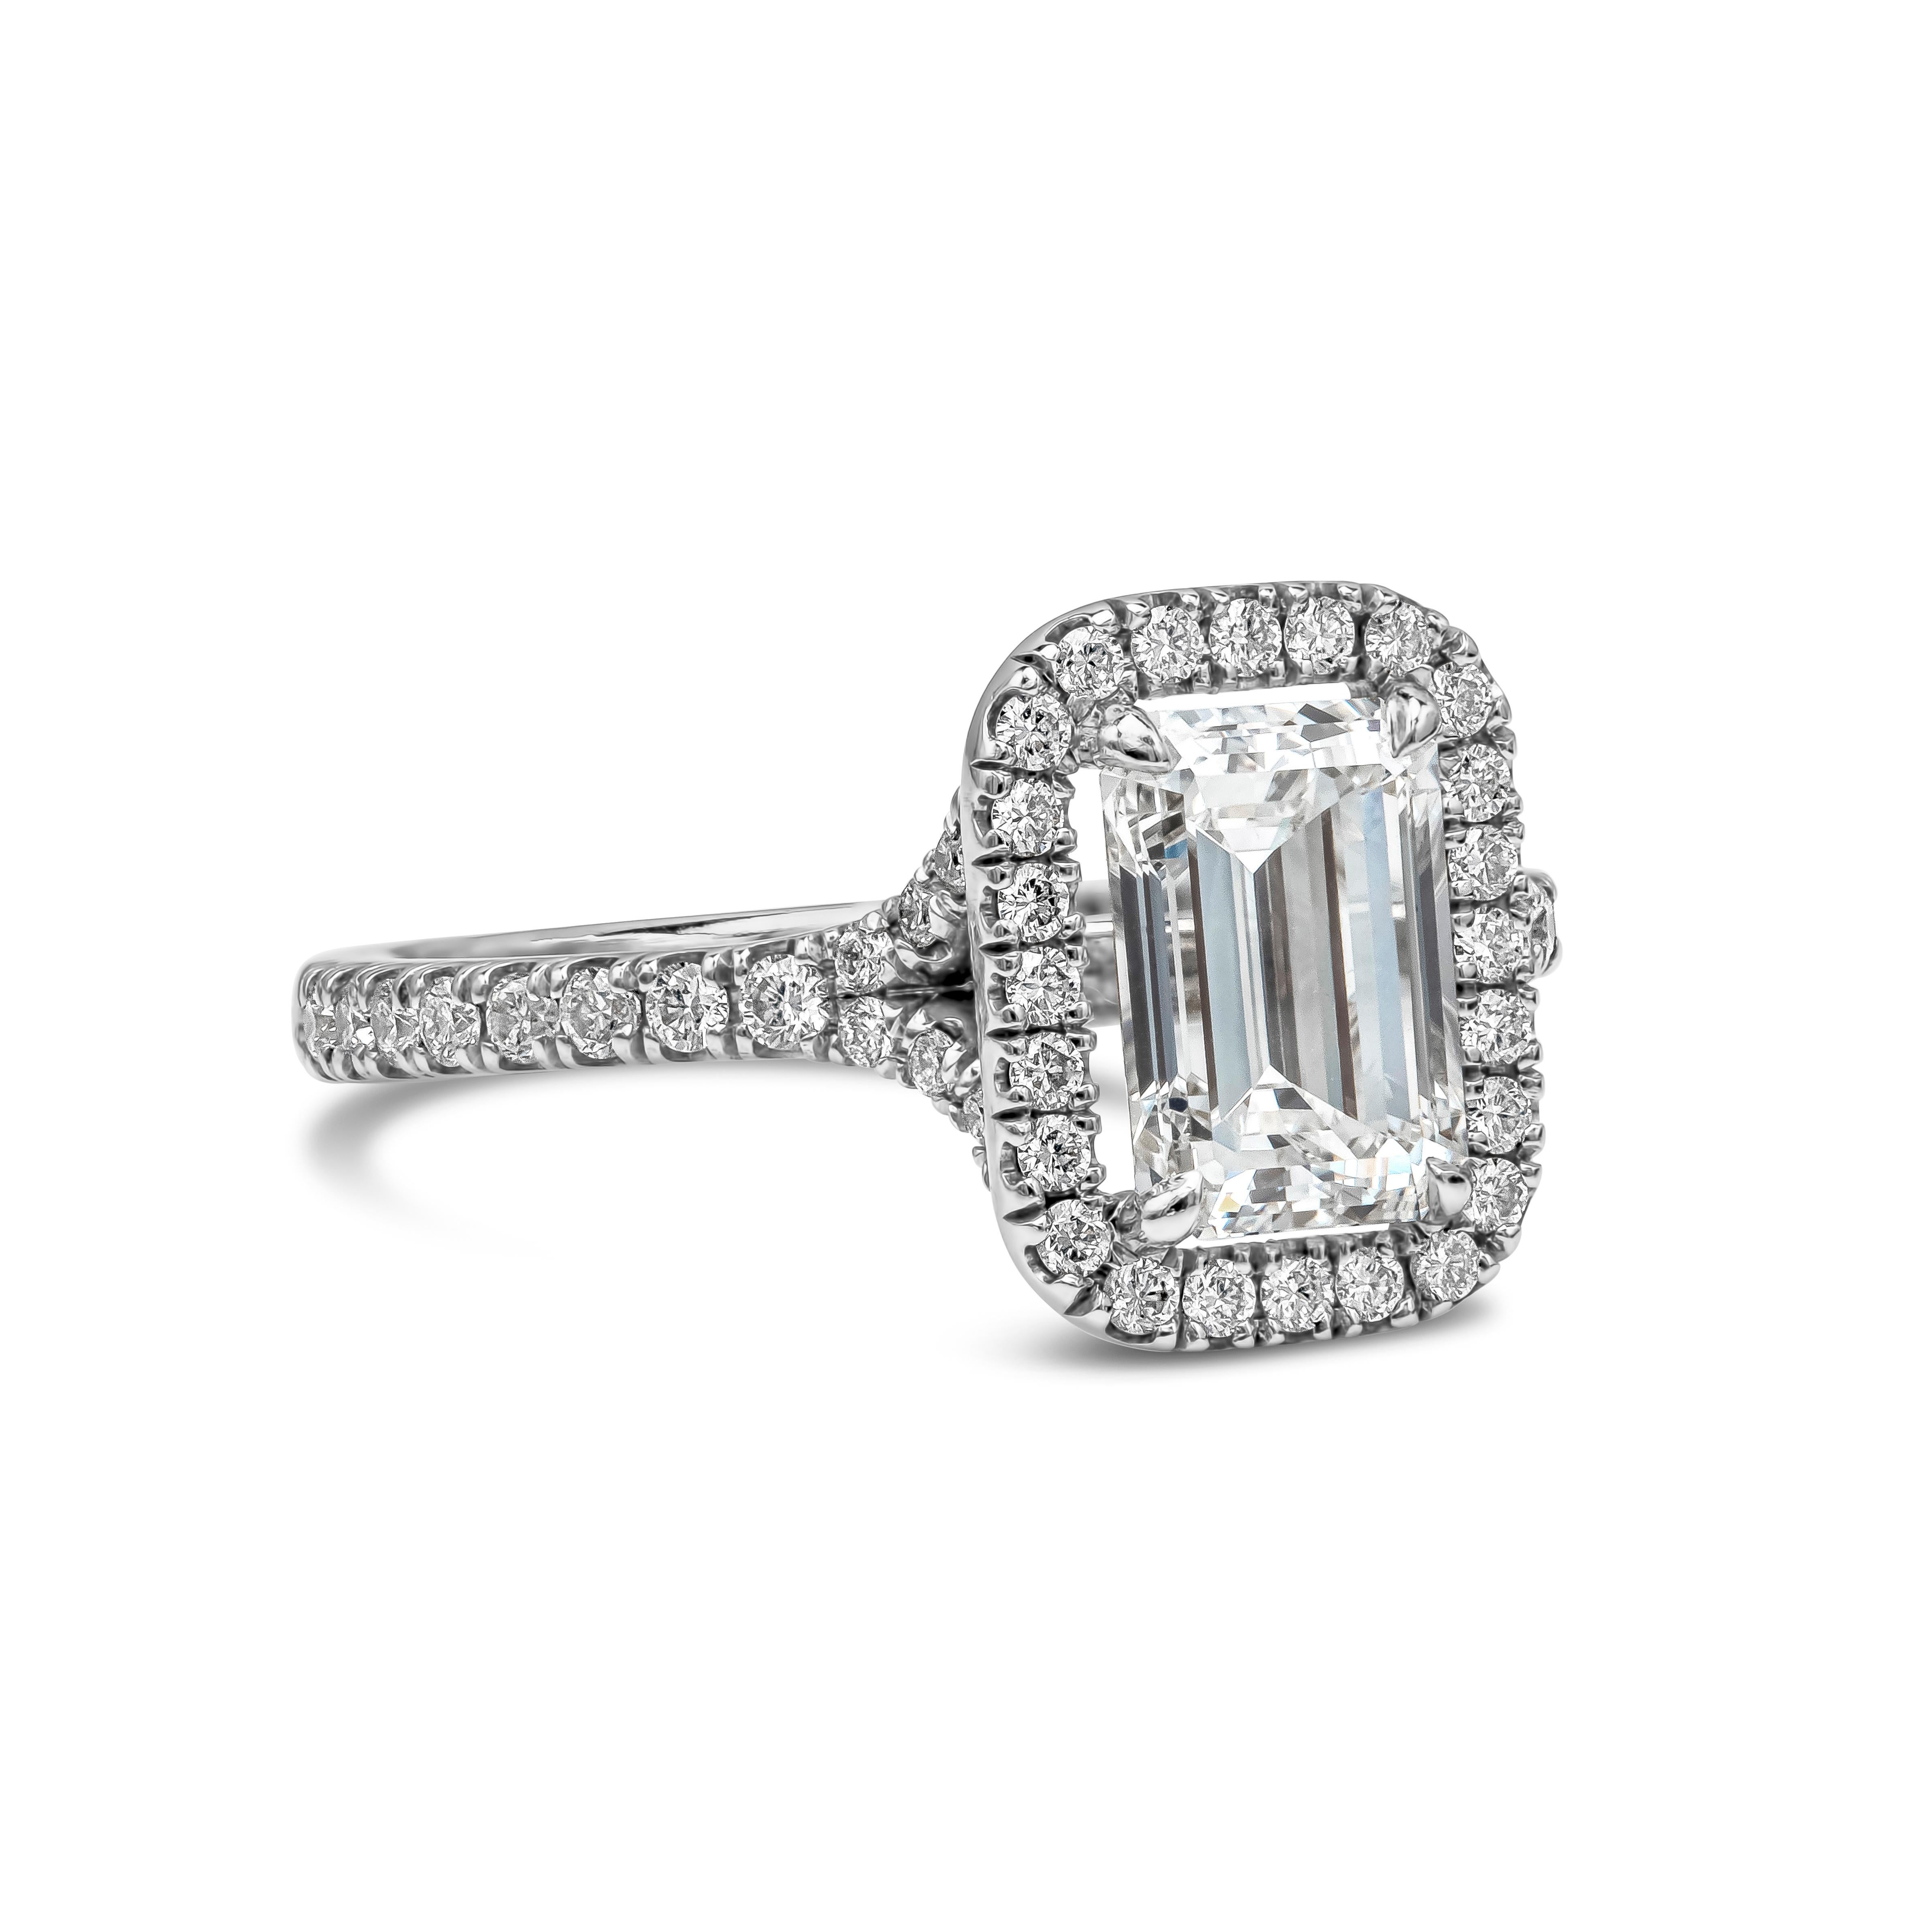 Features a 1.60 carats emerald cut diamond certified by GIA as F color and VS2 in clarity. Surrounded by a single row of round brilliant diamonds in seamless halo setting. Shank is diamond encrusted in half eternity setting made in 18K white gold.